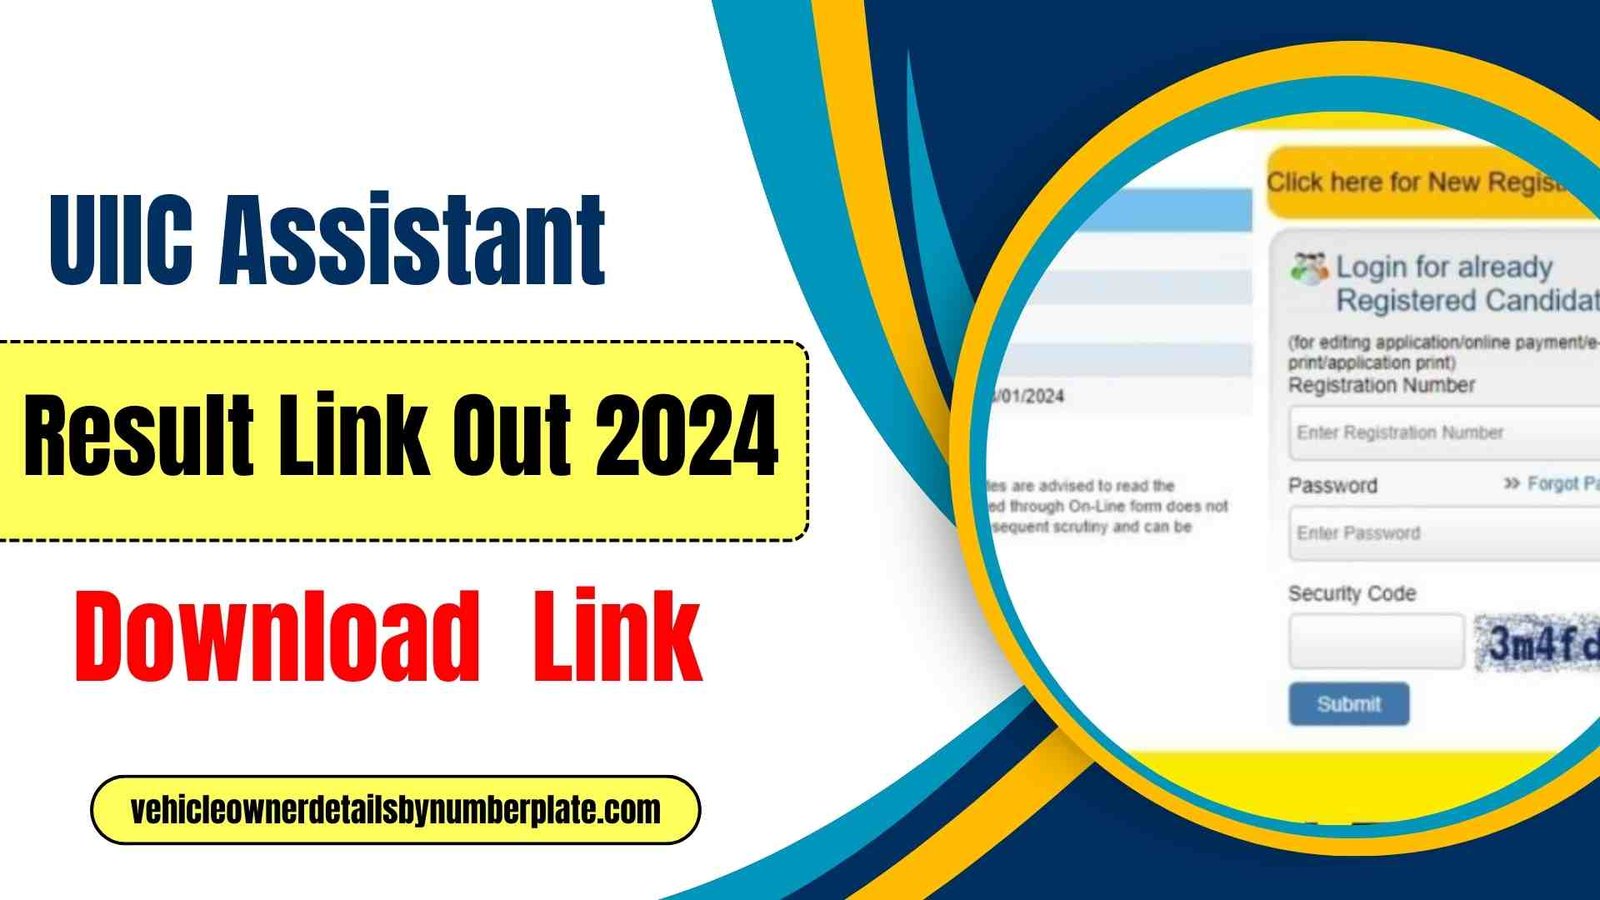 UIIC Result 2024, Check Assistant Cut Off Marks, Merit List